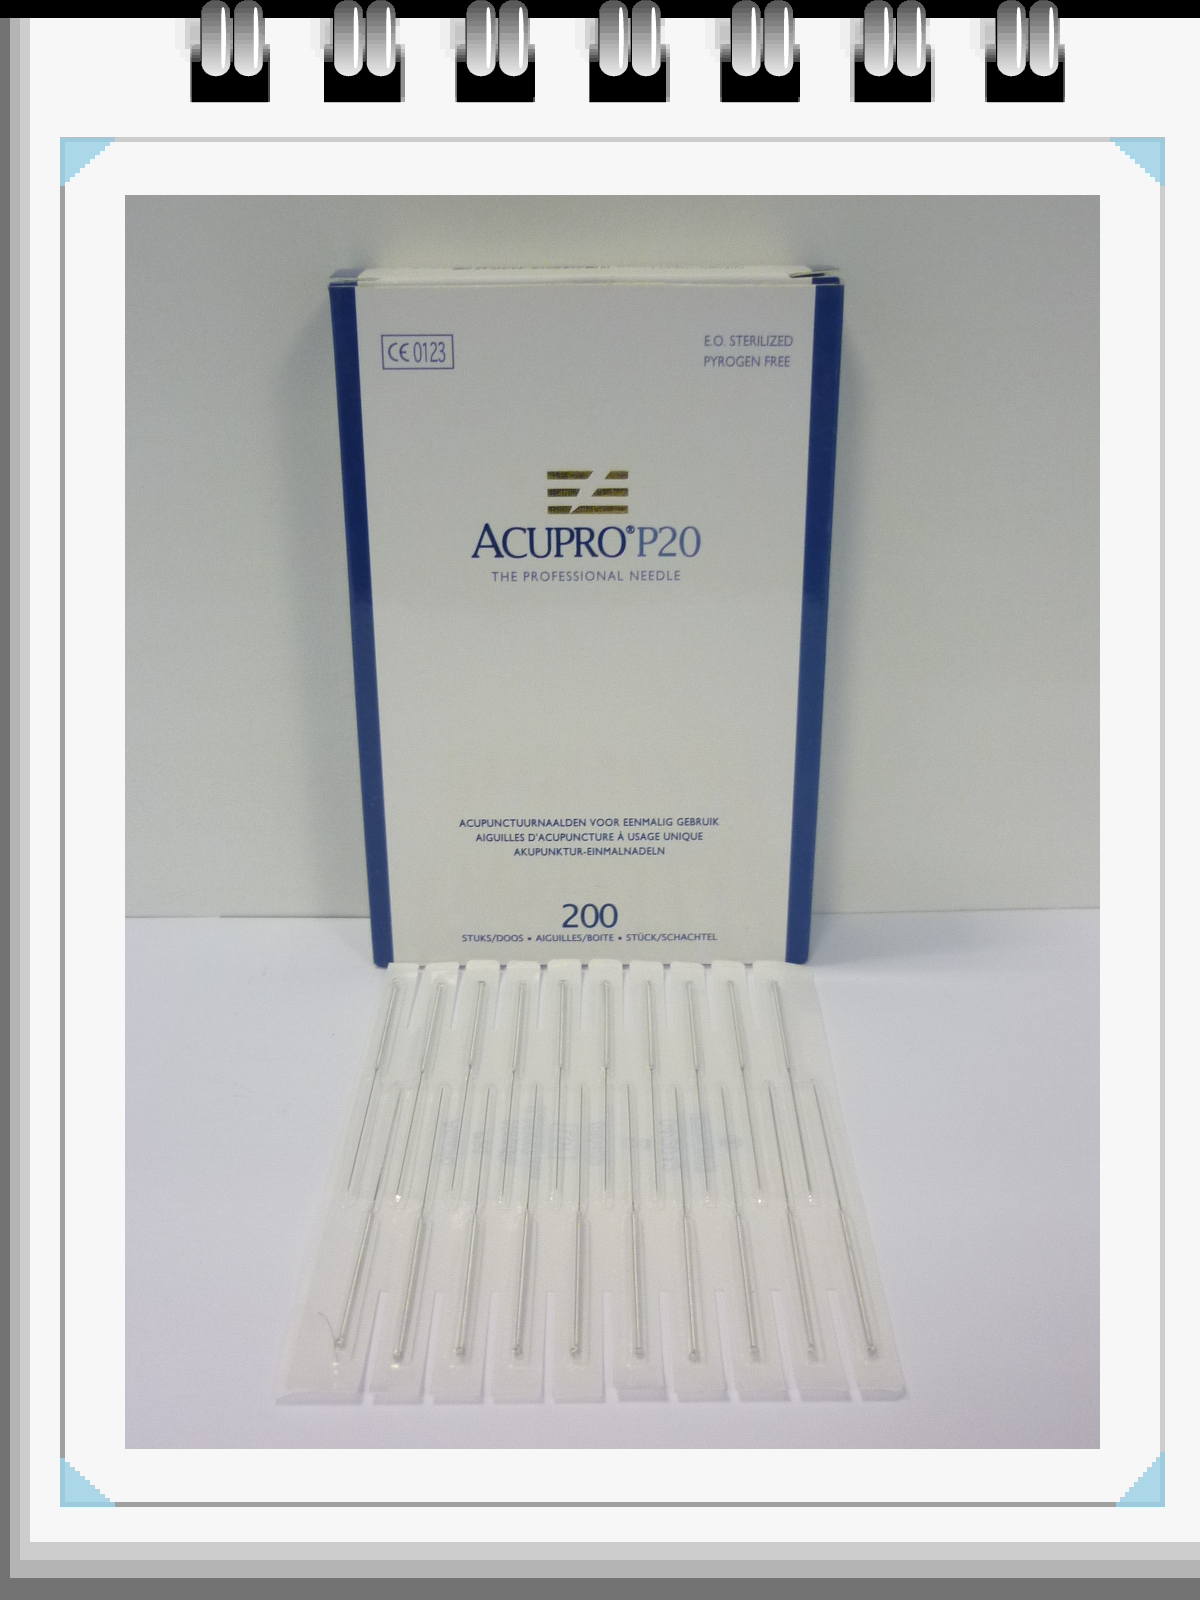 All Products - acupunctuur naalden   0,30 x 75mm   p--200